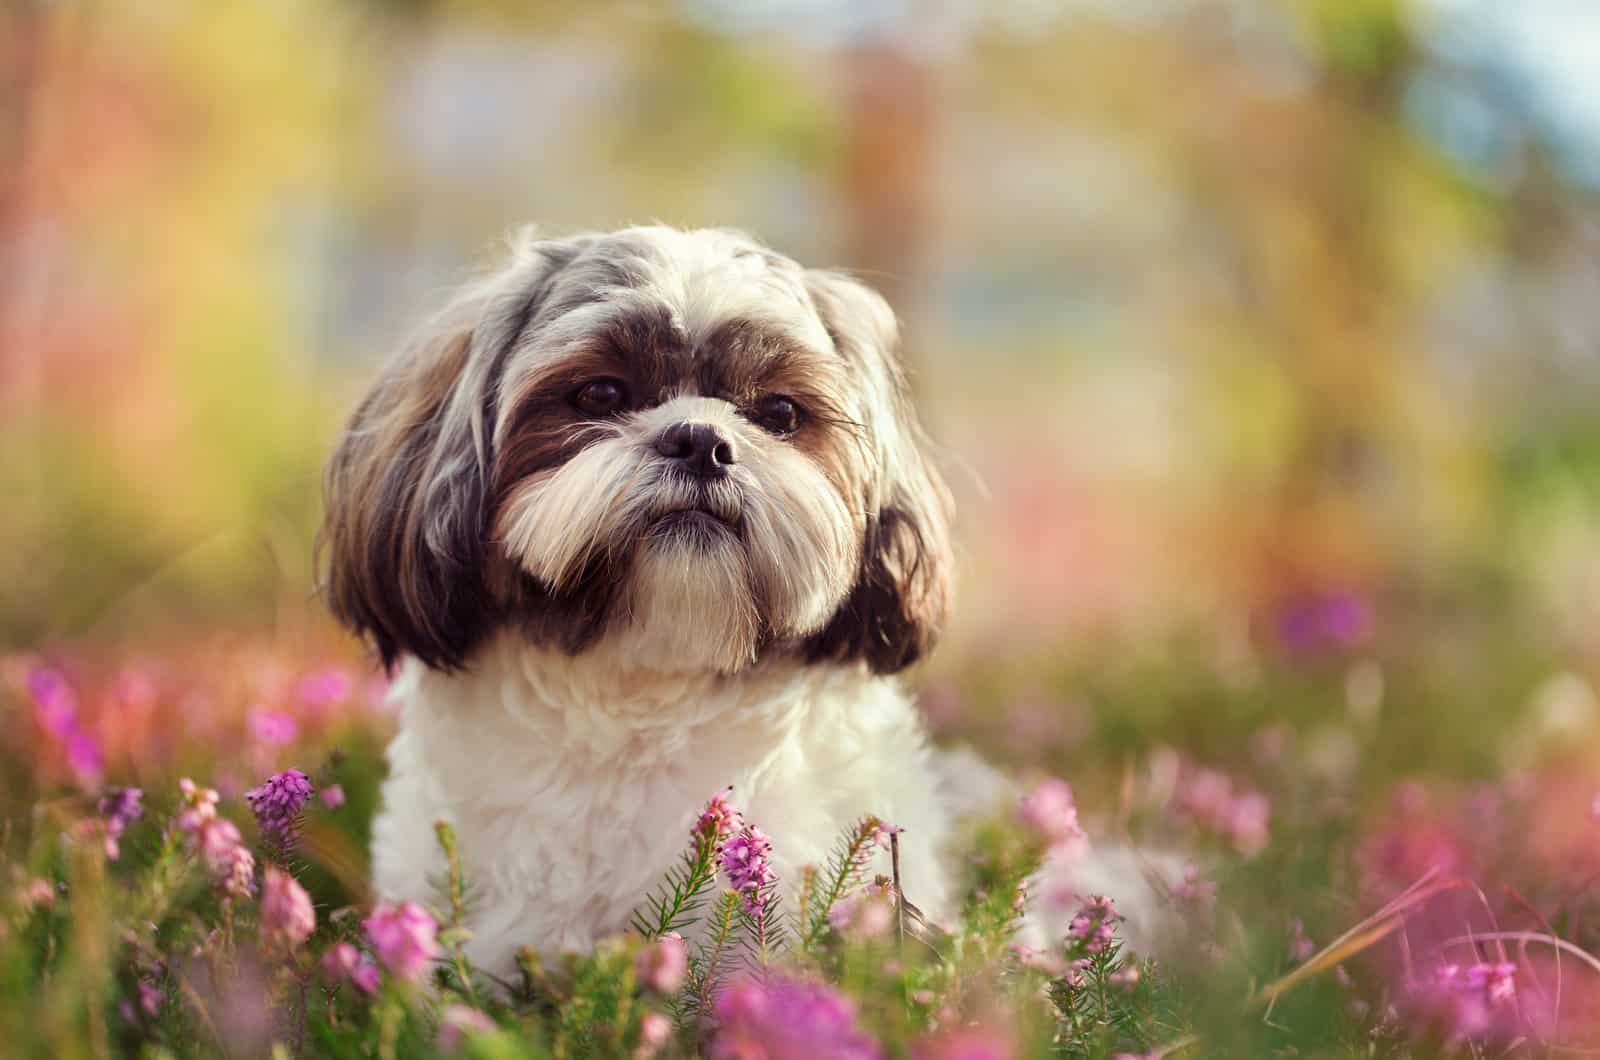 Shih Tzu is lying in the grass